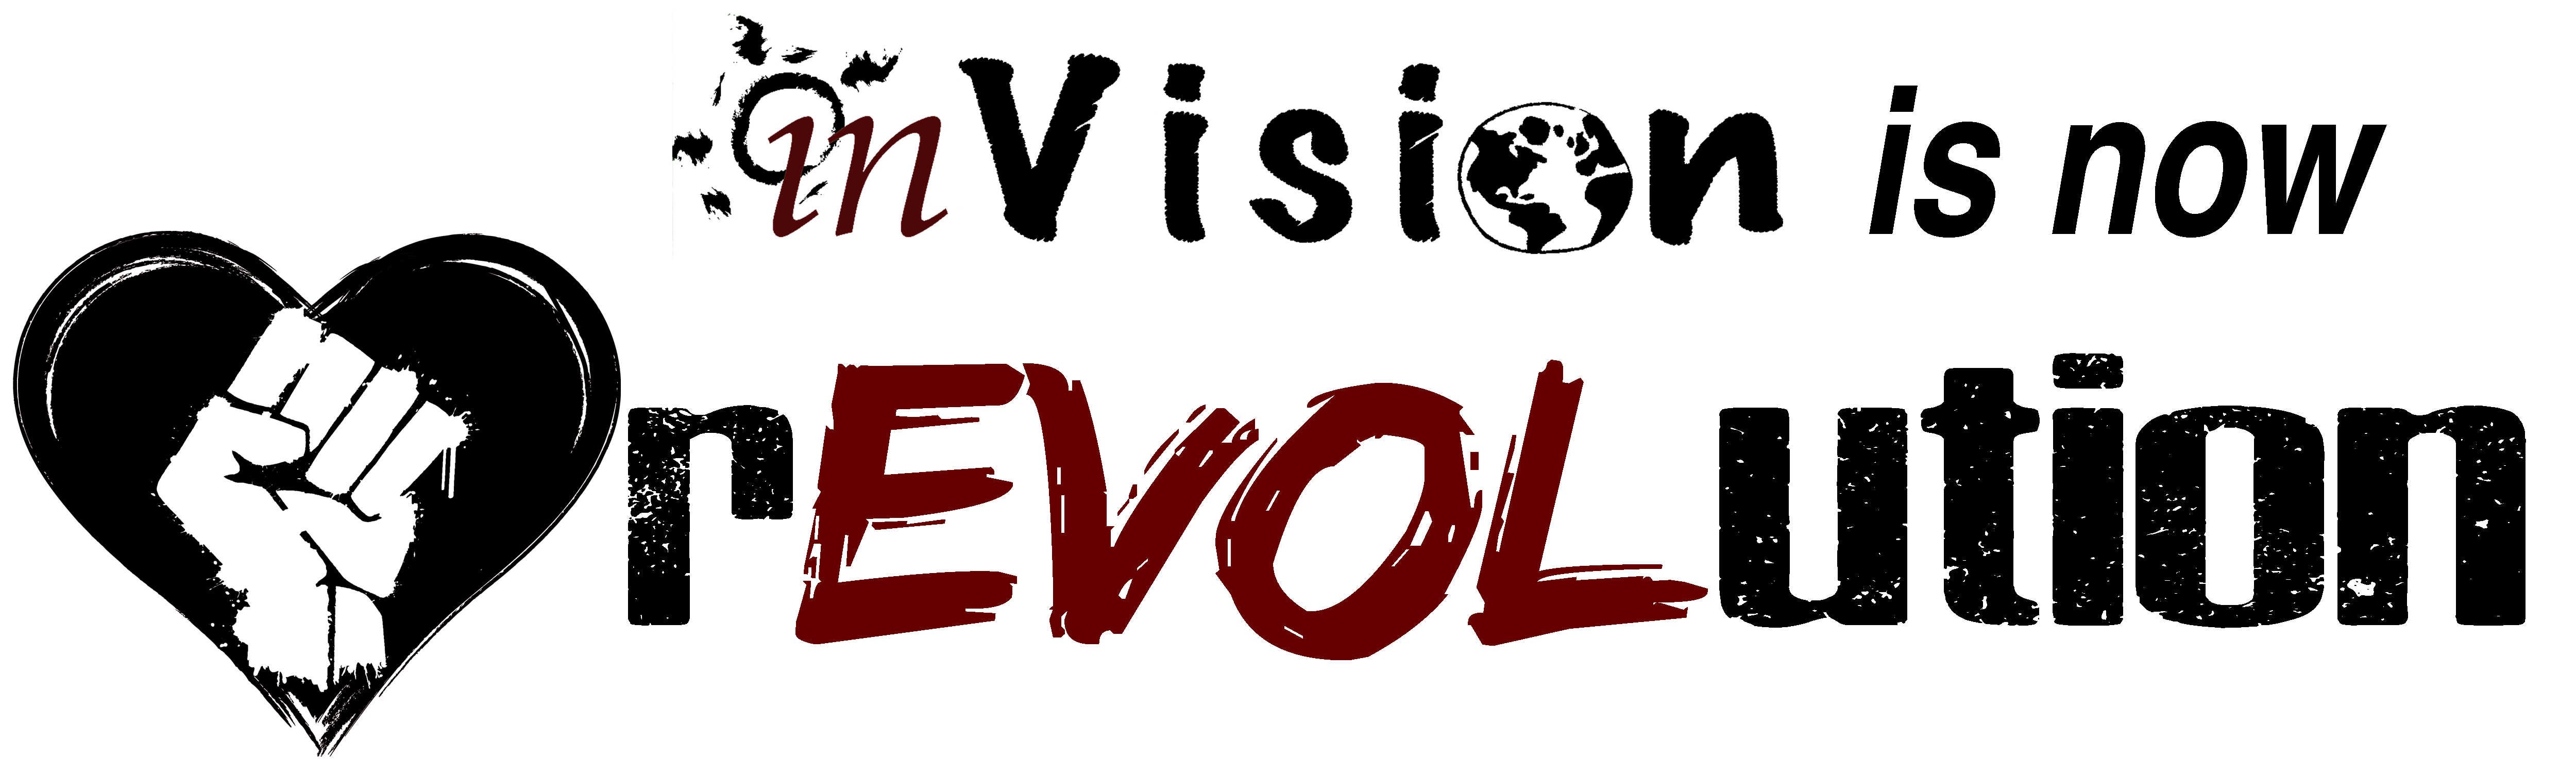 logo: power fist inside black heart shape. Text to the right of logo reads: inVision is now rEVOLution